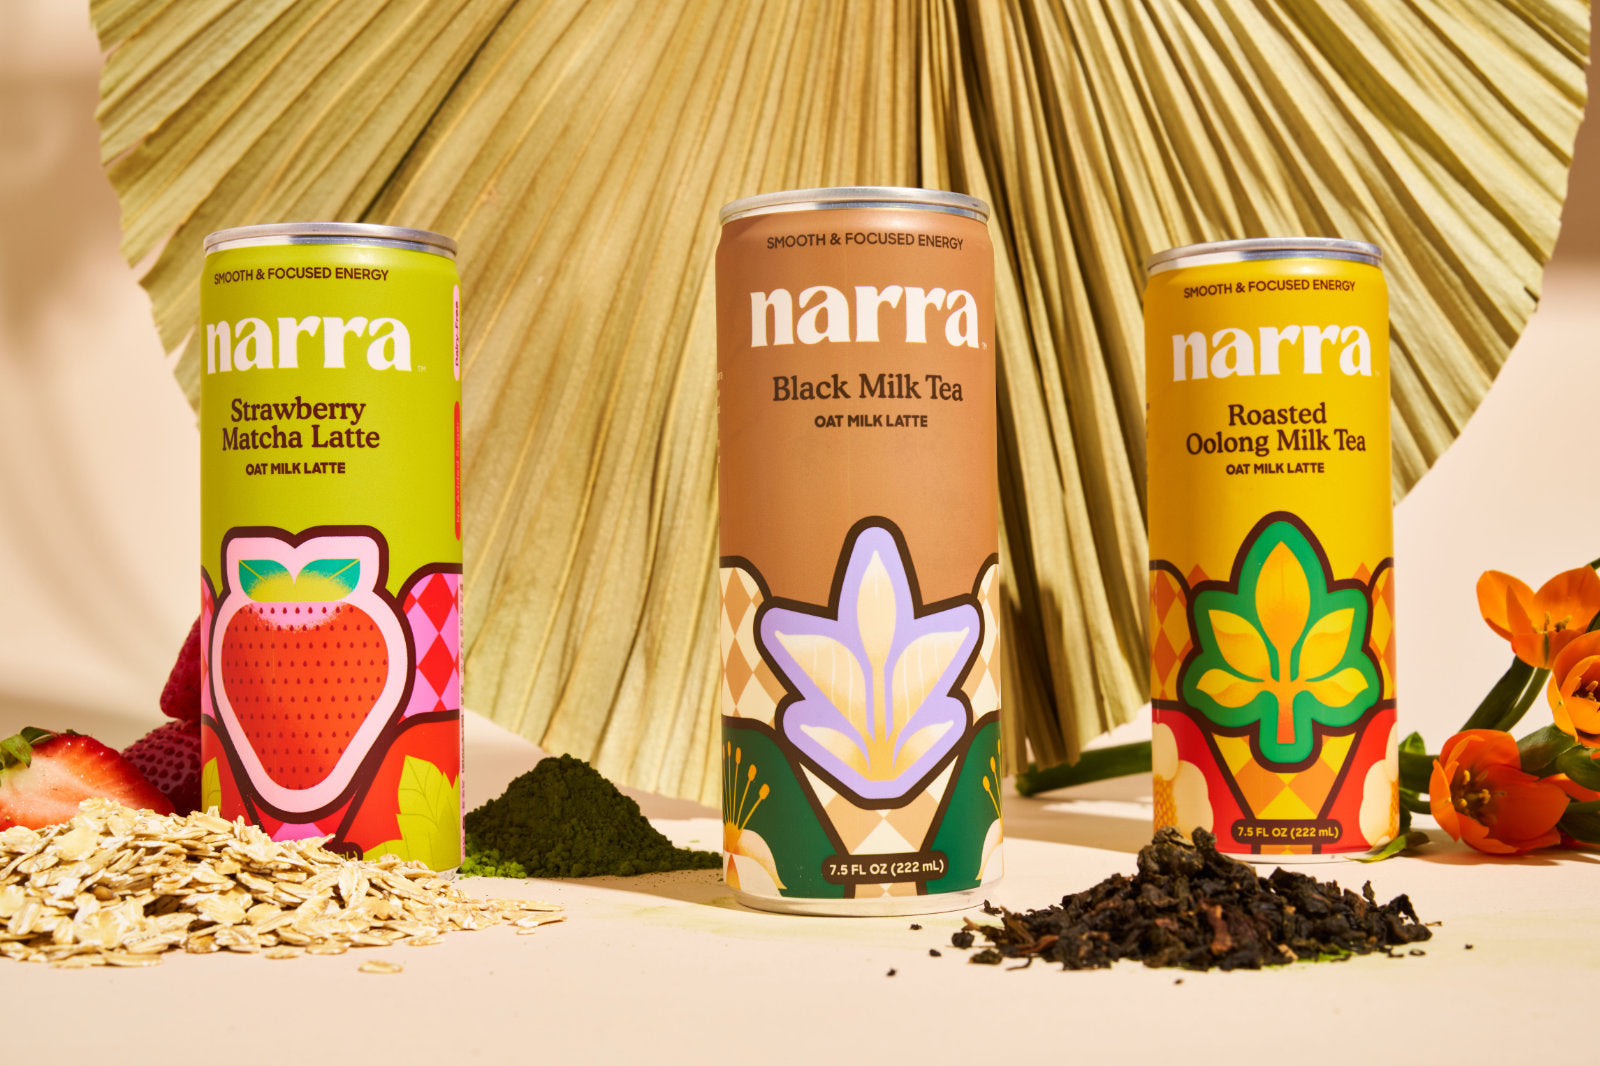 Narra oat milk lattes in Black Milk Tea, Strawberry Matcha Latte, and Roasted Oolong Milk Tea flavors with flowers, matcha, oats, and loose tea placed on a table.